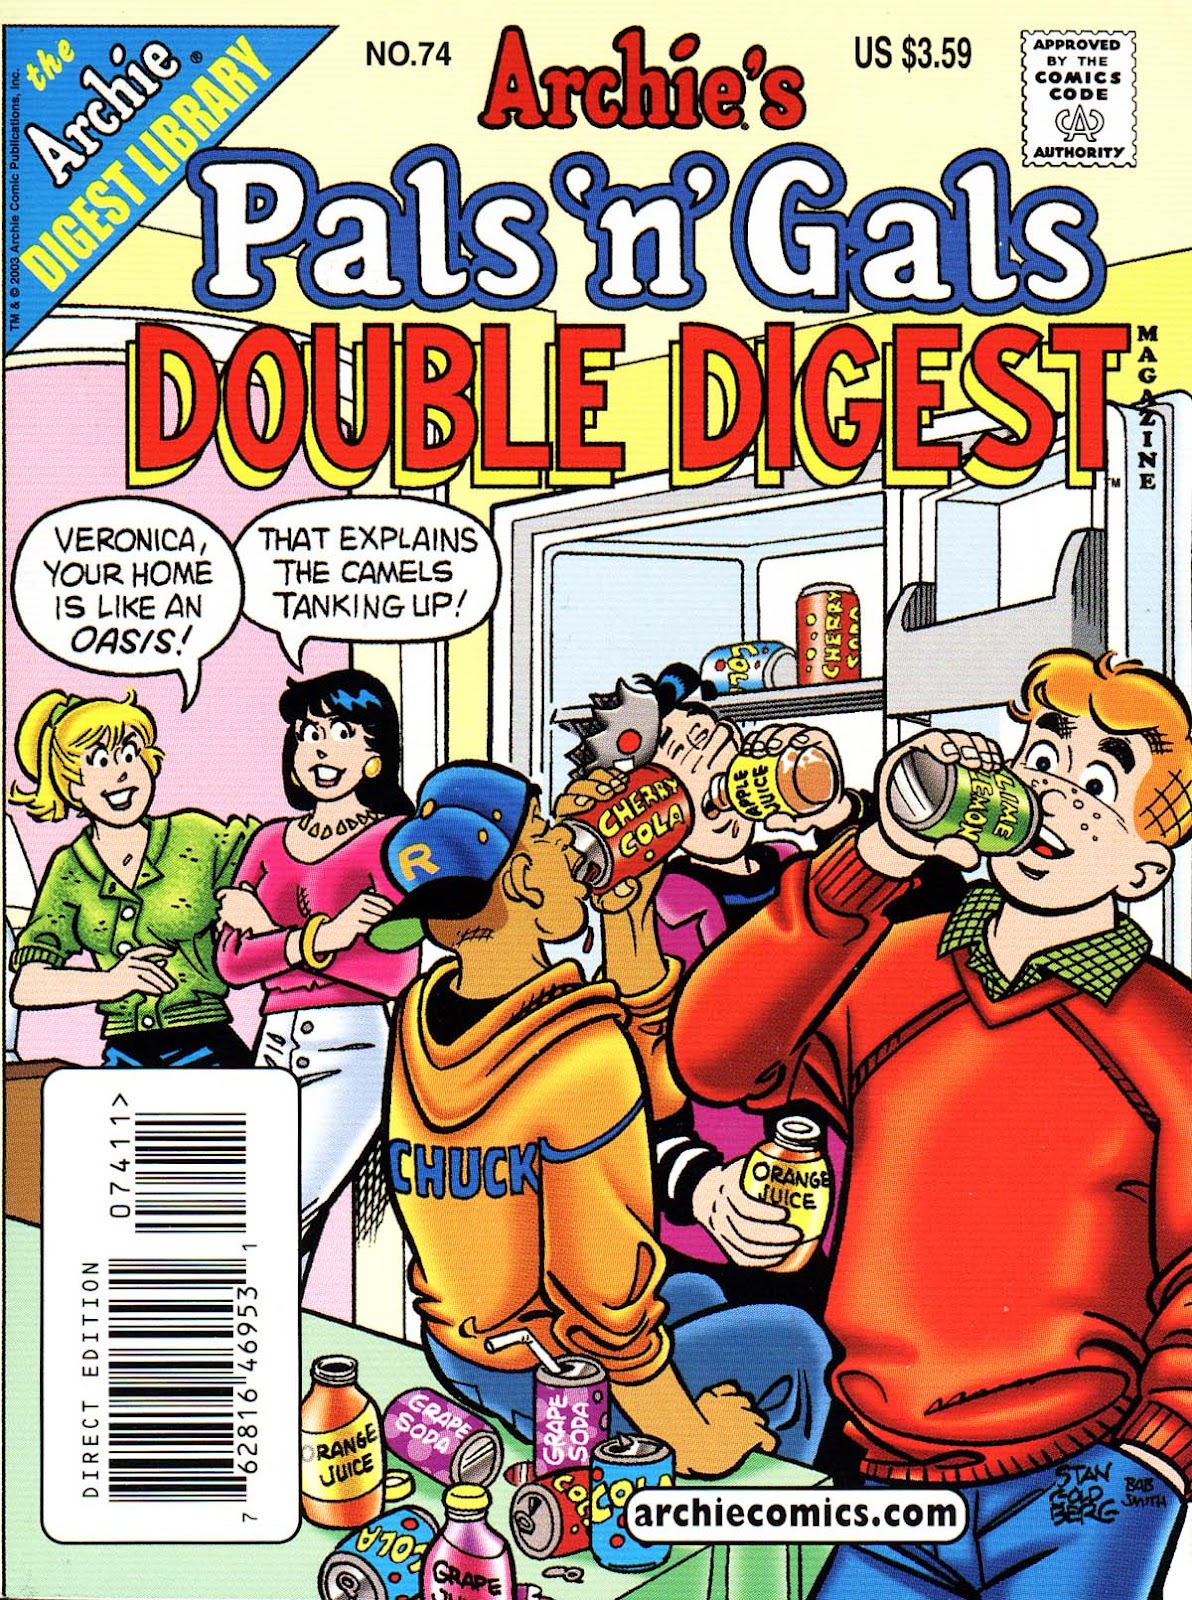 Archie's Pals 'n' Gals Double Digest Magazine issue 74 - Page 1